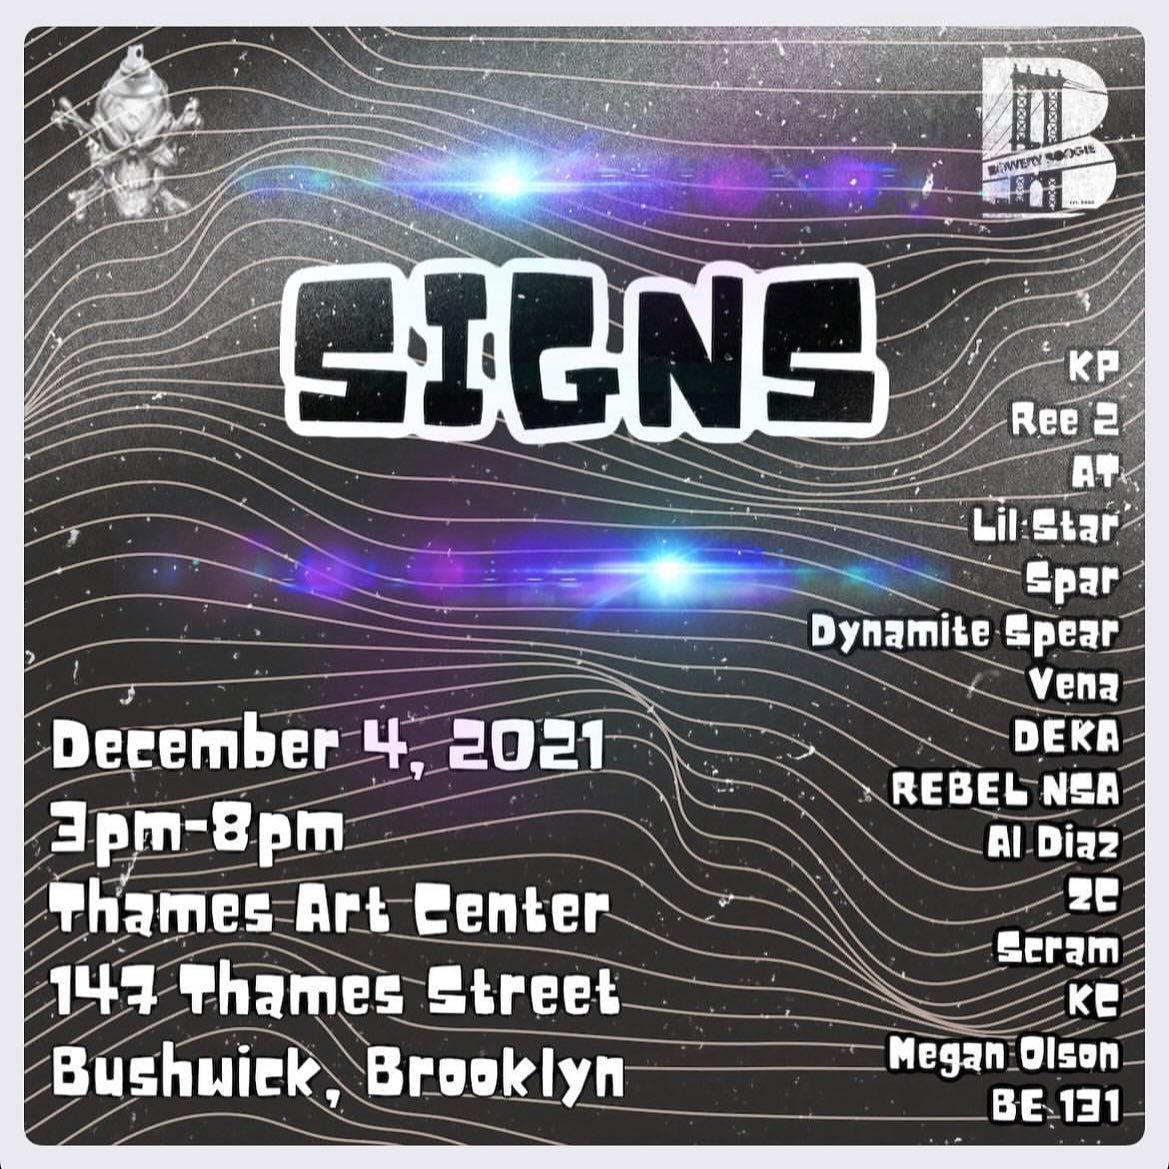 Image of announcement for SIGNS art show featuring Megan Olson among artists